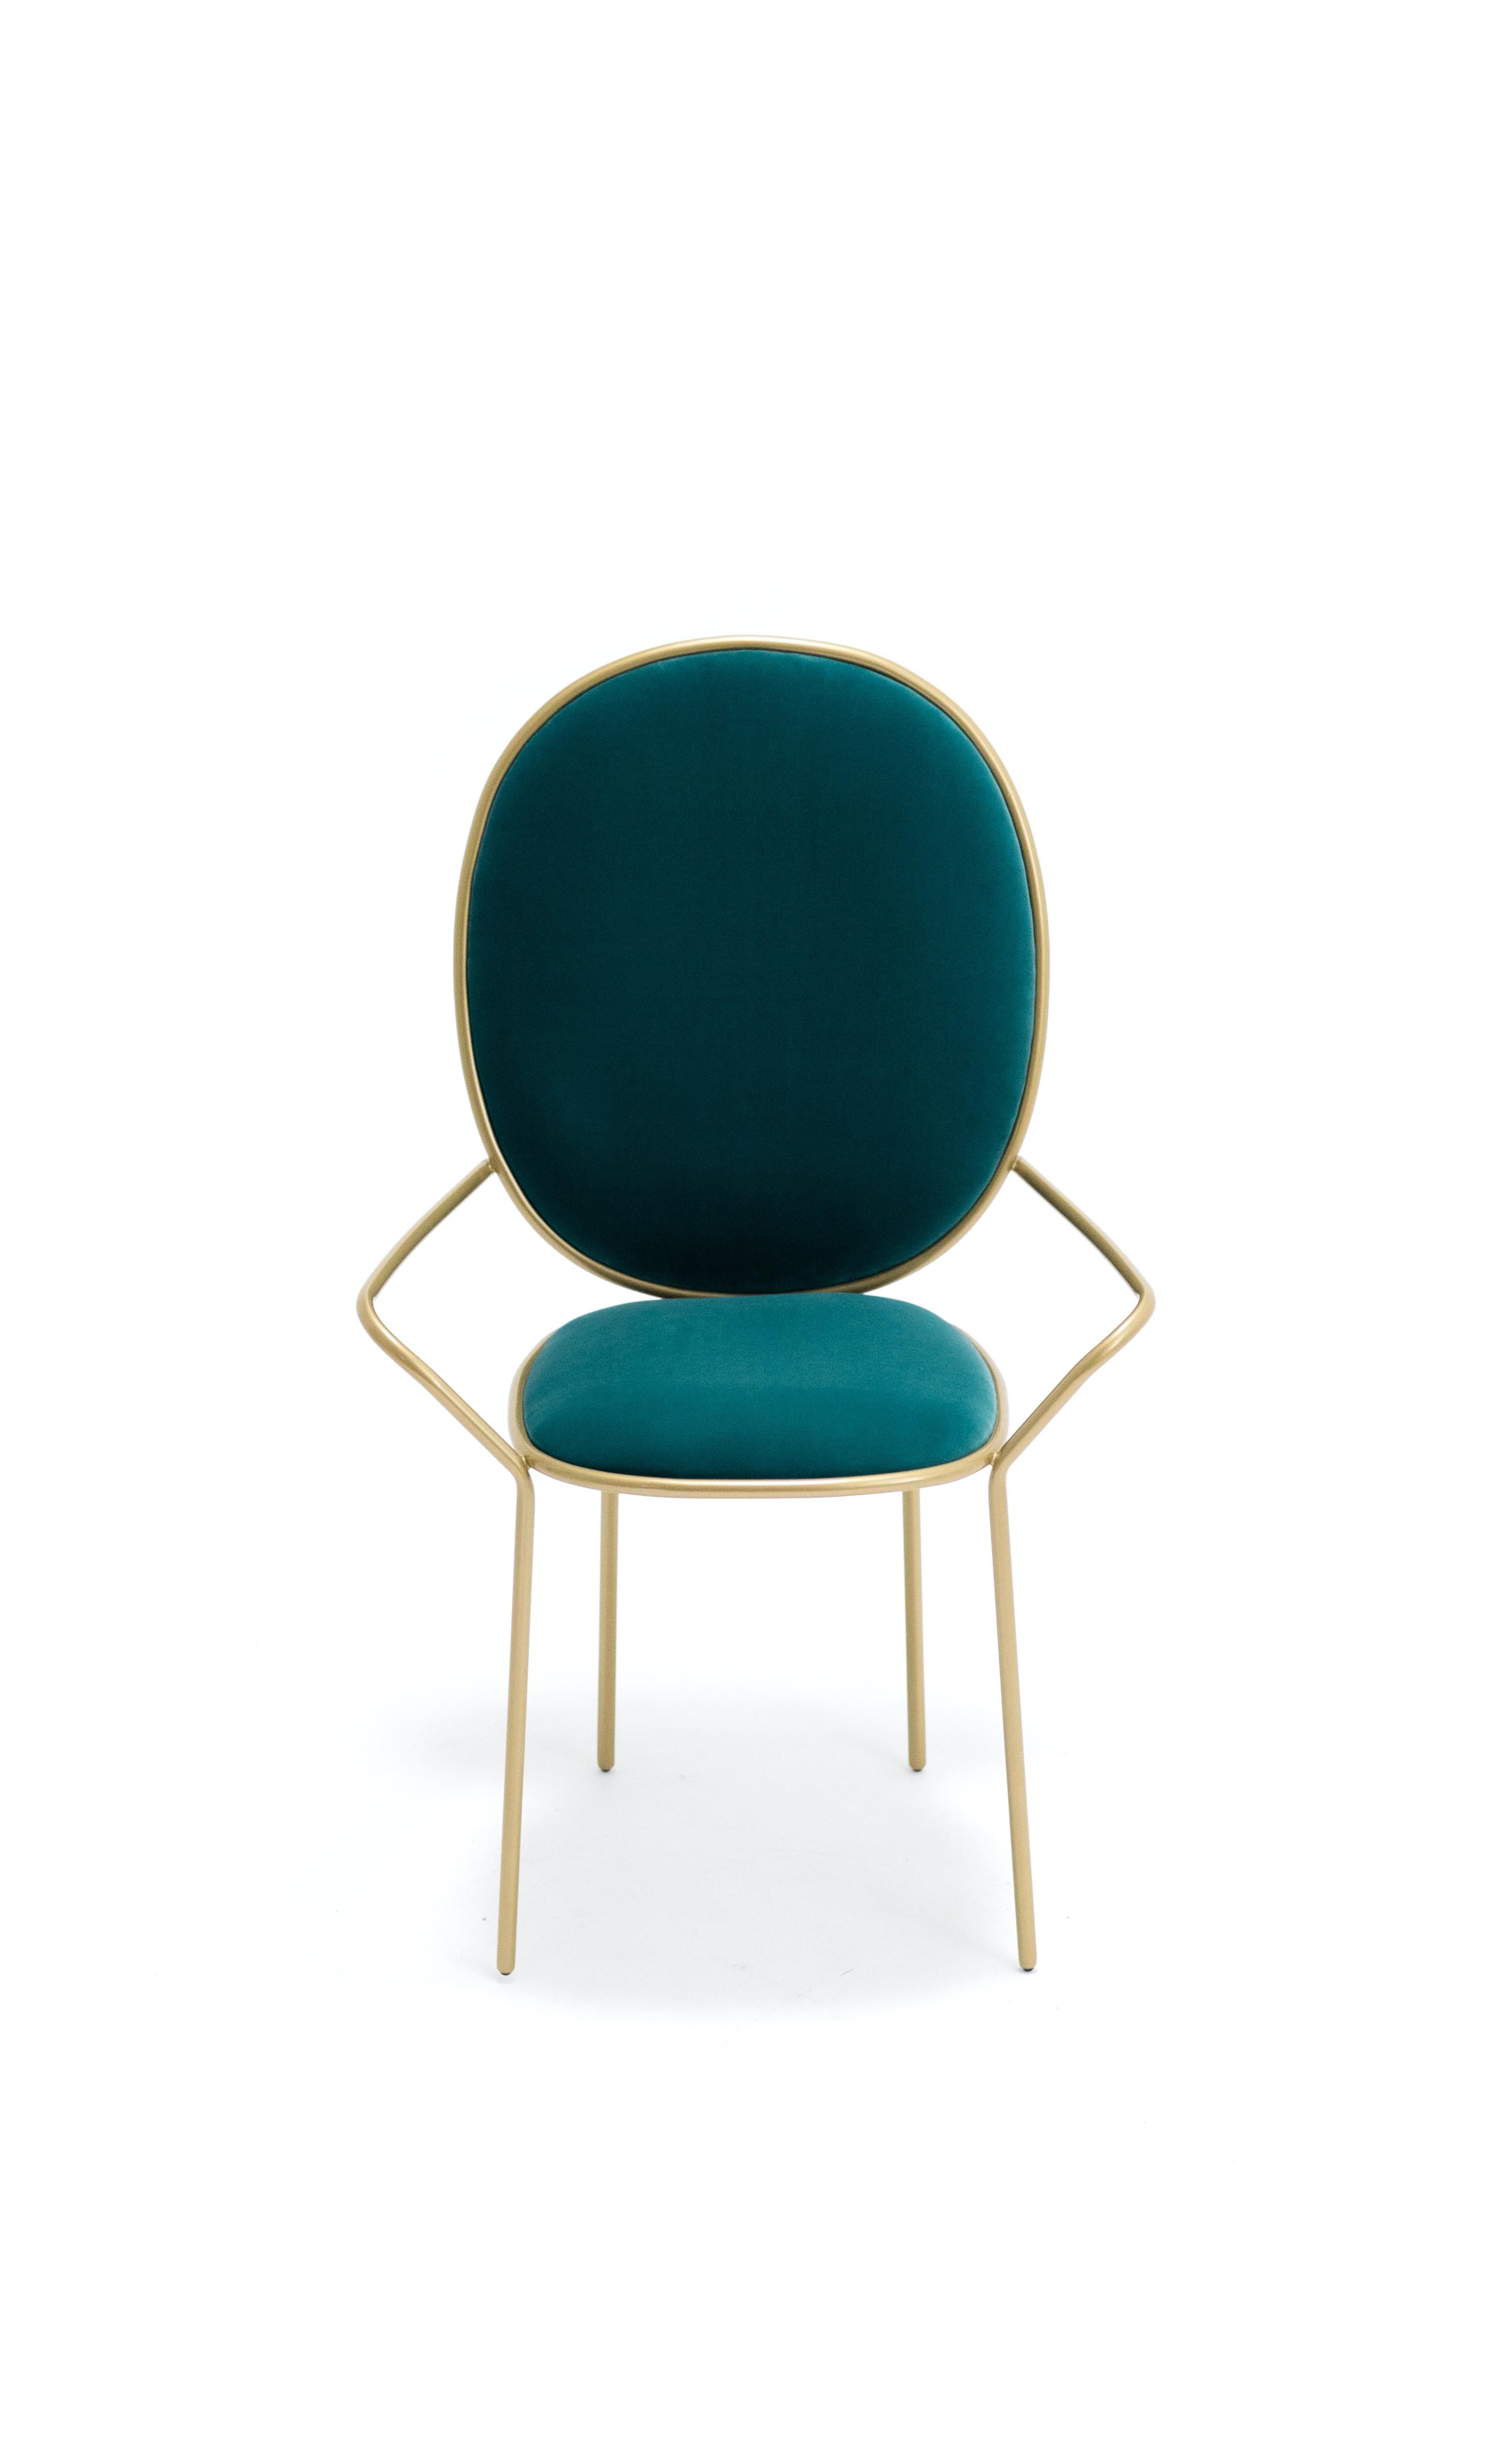 Slovenian Contemporary Ocean Green Velvet Upholstered Dining Armchair, Stay by Nika Zupanc For Sale